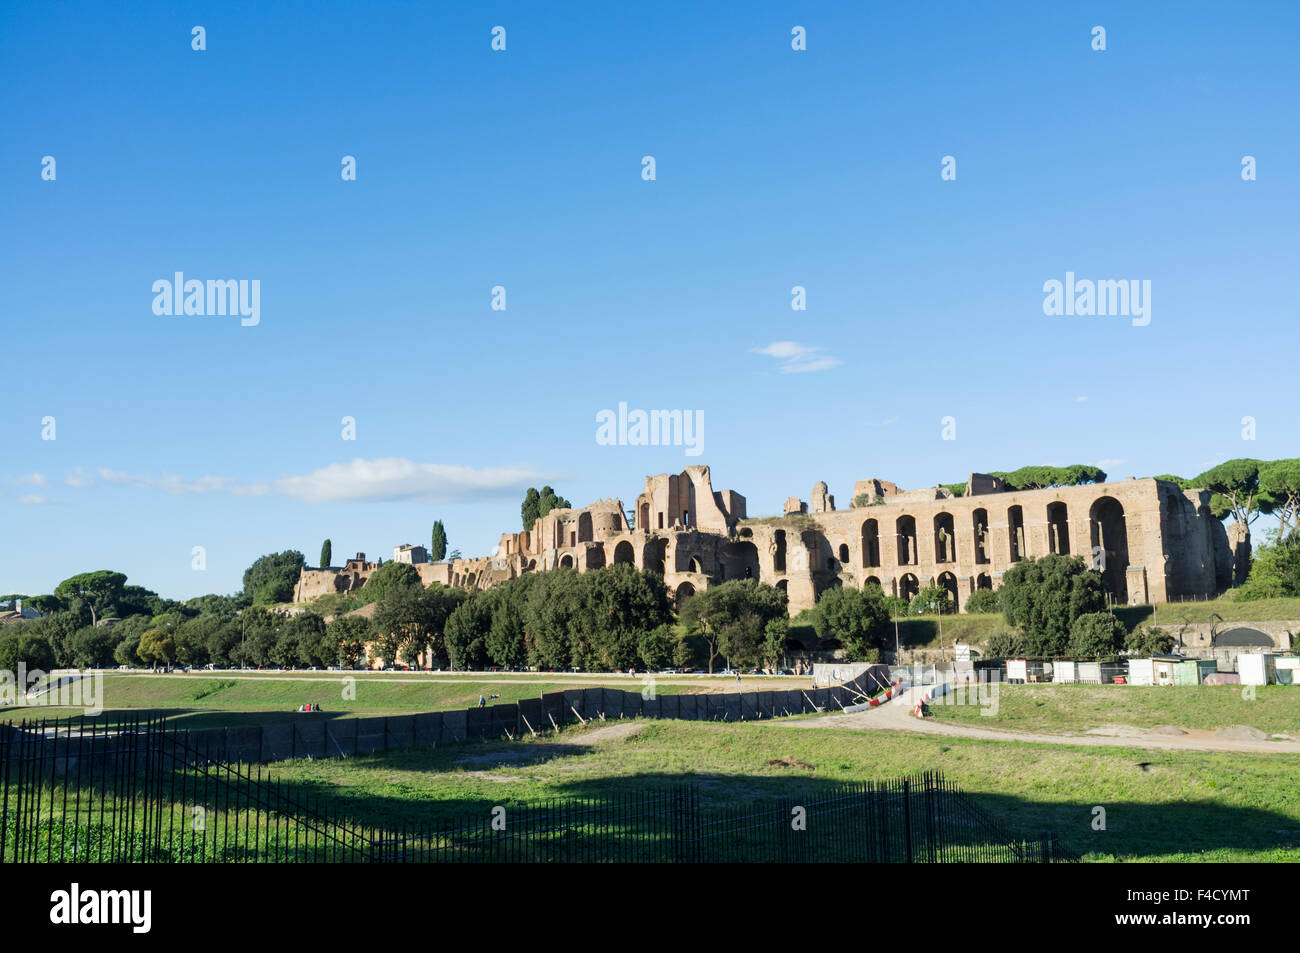 Circus Maximus site and the Palatine Hill in background. Rome, Itally Stock Photo